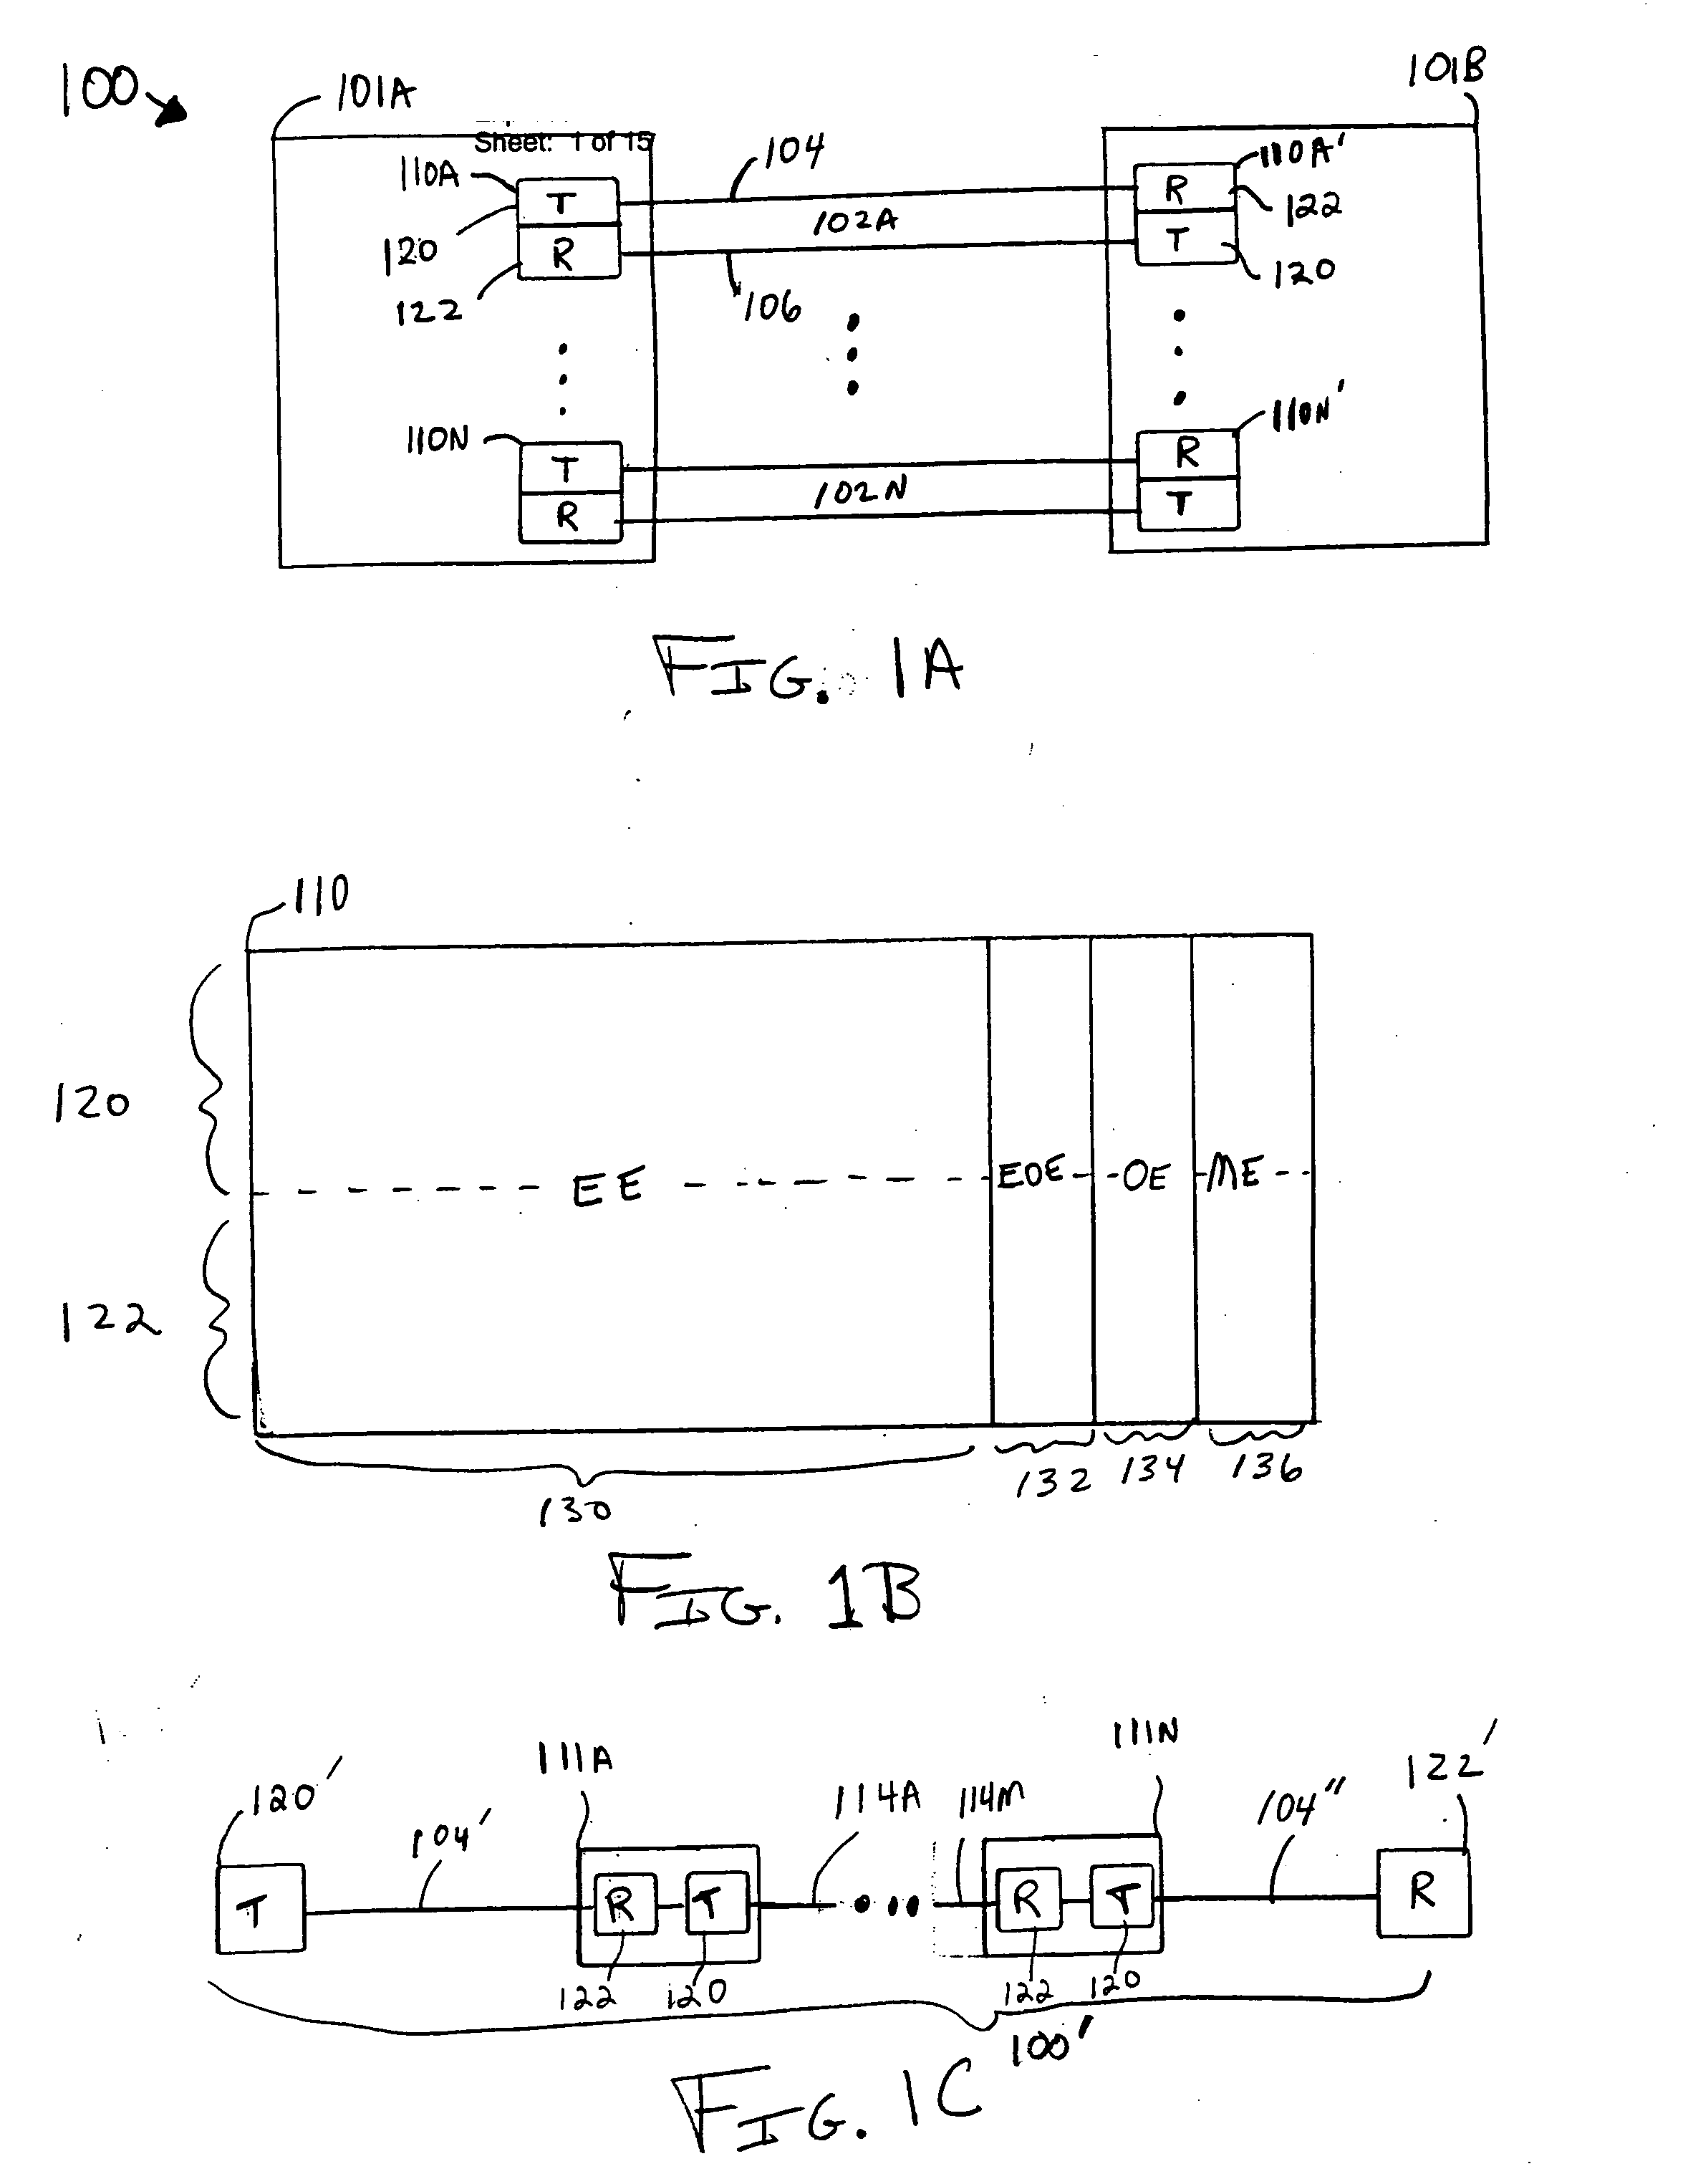 Systems with spread-pulse modulation and nonlinear time domain equalization for fiber optic communication channels